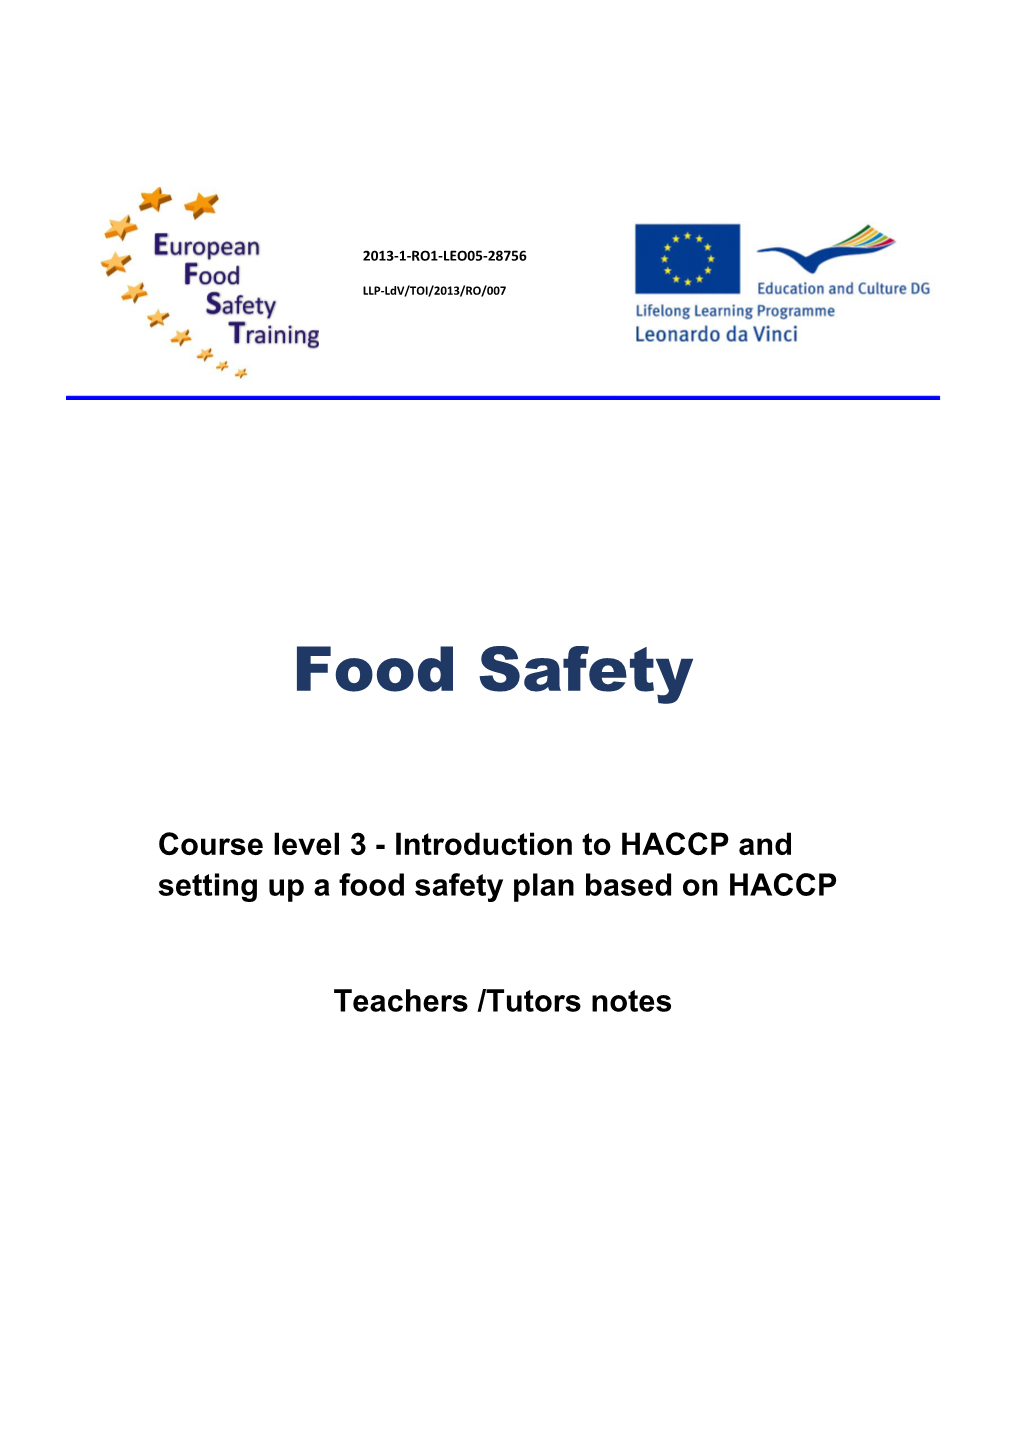 Course Level 3 -Introduction to HACCP and Settingup a Food Safety Plan Based on HACCP